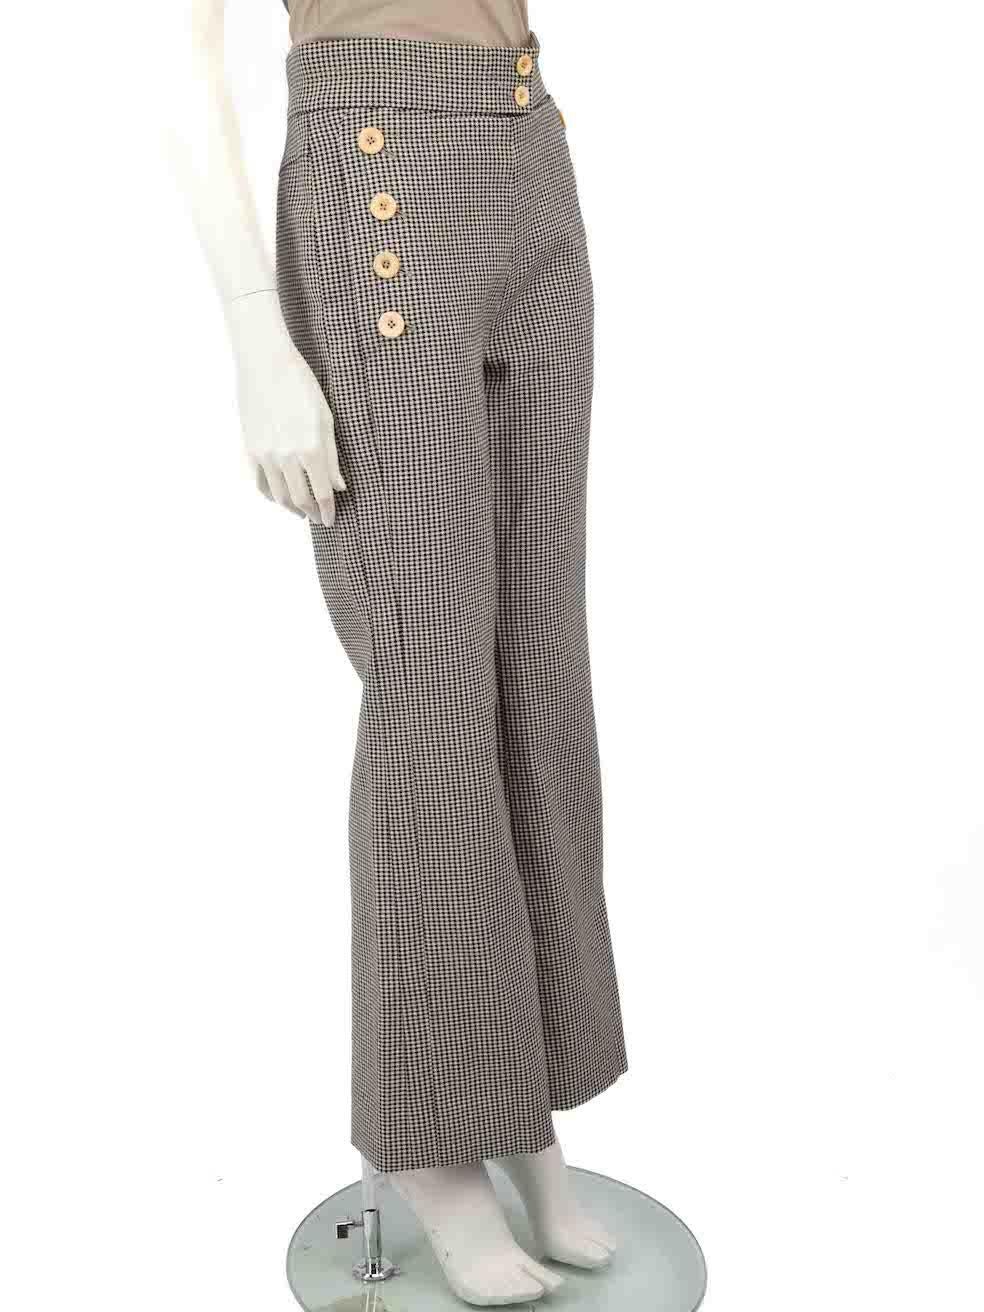 CONDITION is Very good. Hardly any visible wear to trousers is evident on this used Chloé designer resale item.
 
 
 
 Details
 
 
 Grey
 
 Wool
 
 Trousers
 
 Houndstooth pattern
 
 Straight leg
 
 Front button detail
 
 2x Side pockets
 
 Side zip